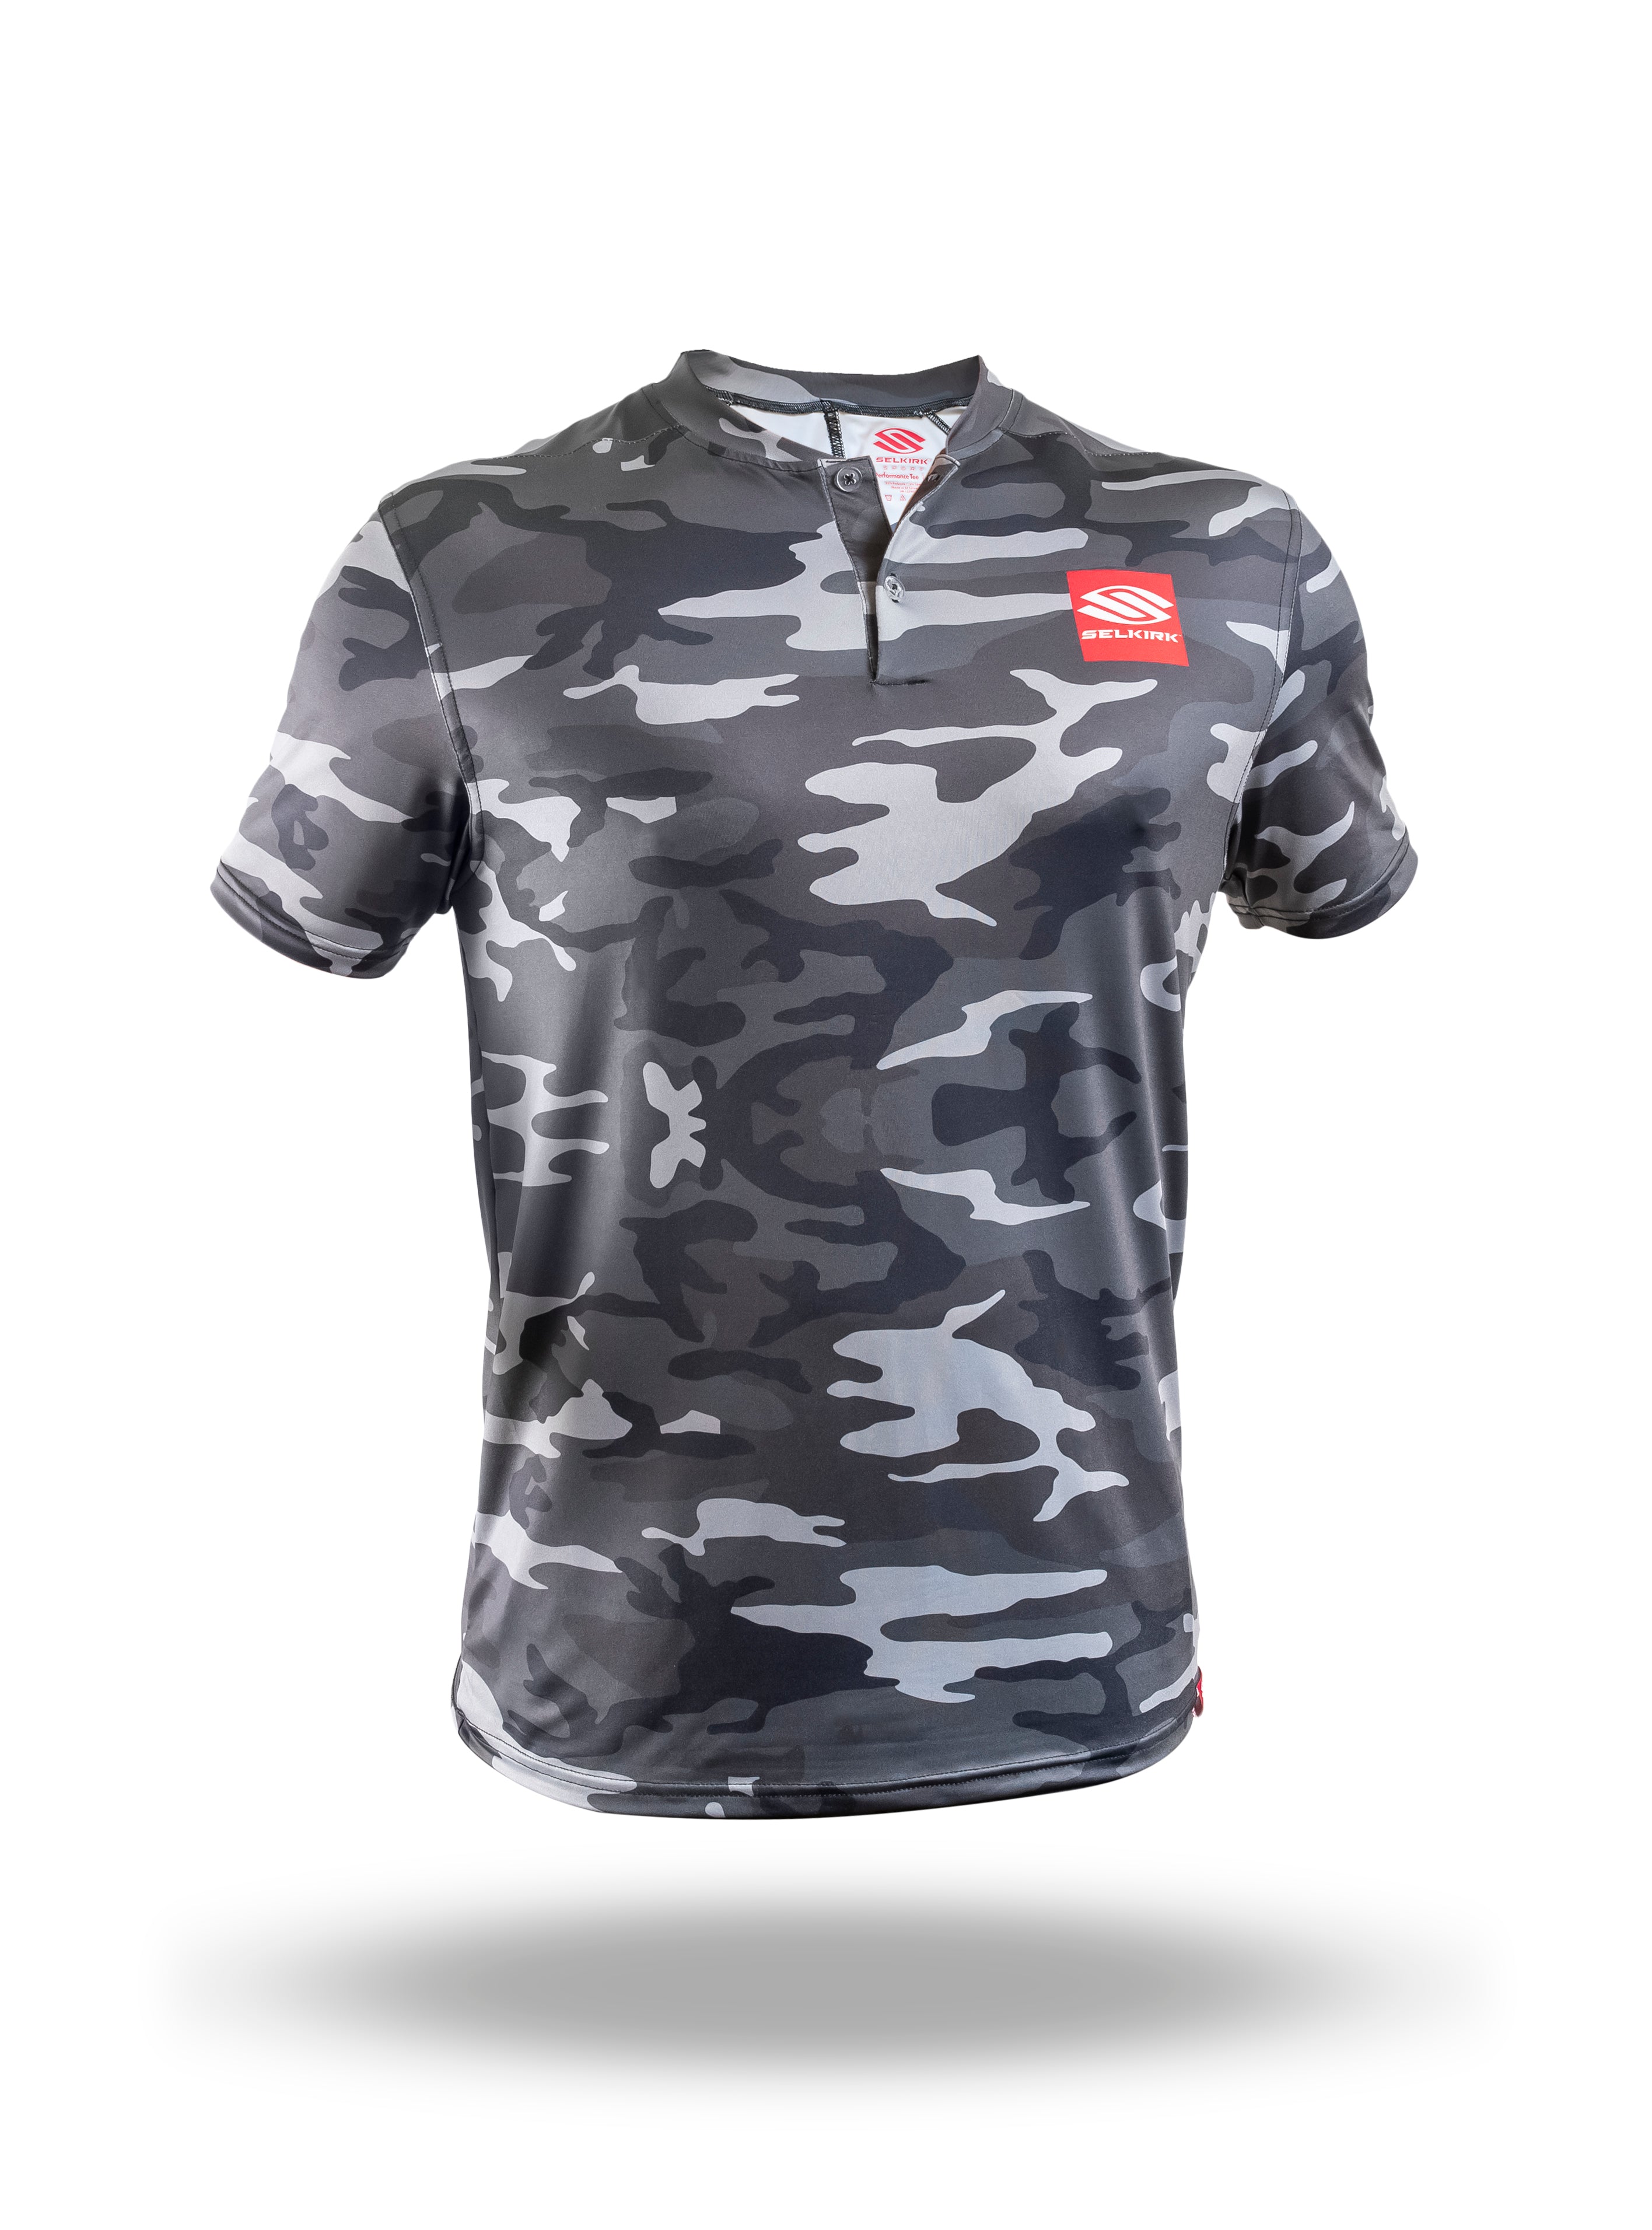 Selkirk Red Label Men's Velocity Polo - Camo - Stetch-Wik Technology